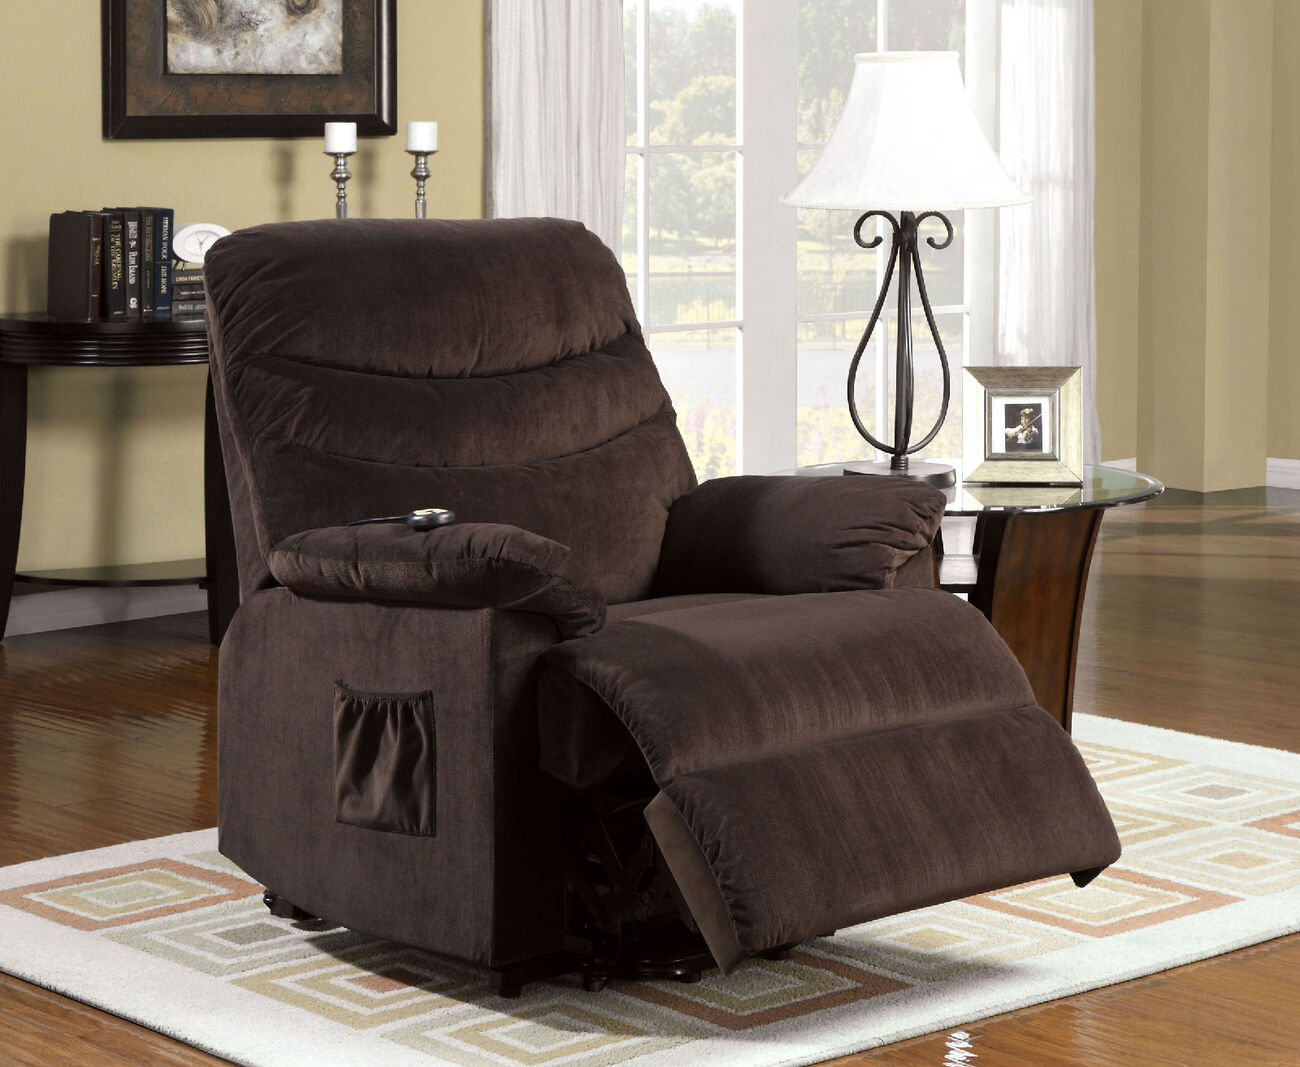 Fabric Upholstered Metal Power Lift Reclining Chair with Remote Control, Brown